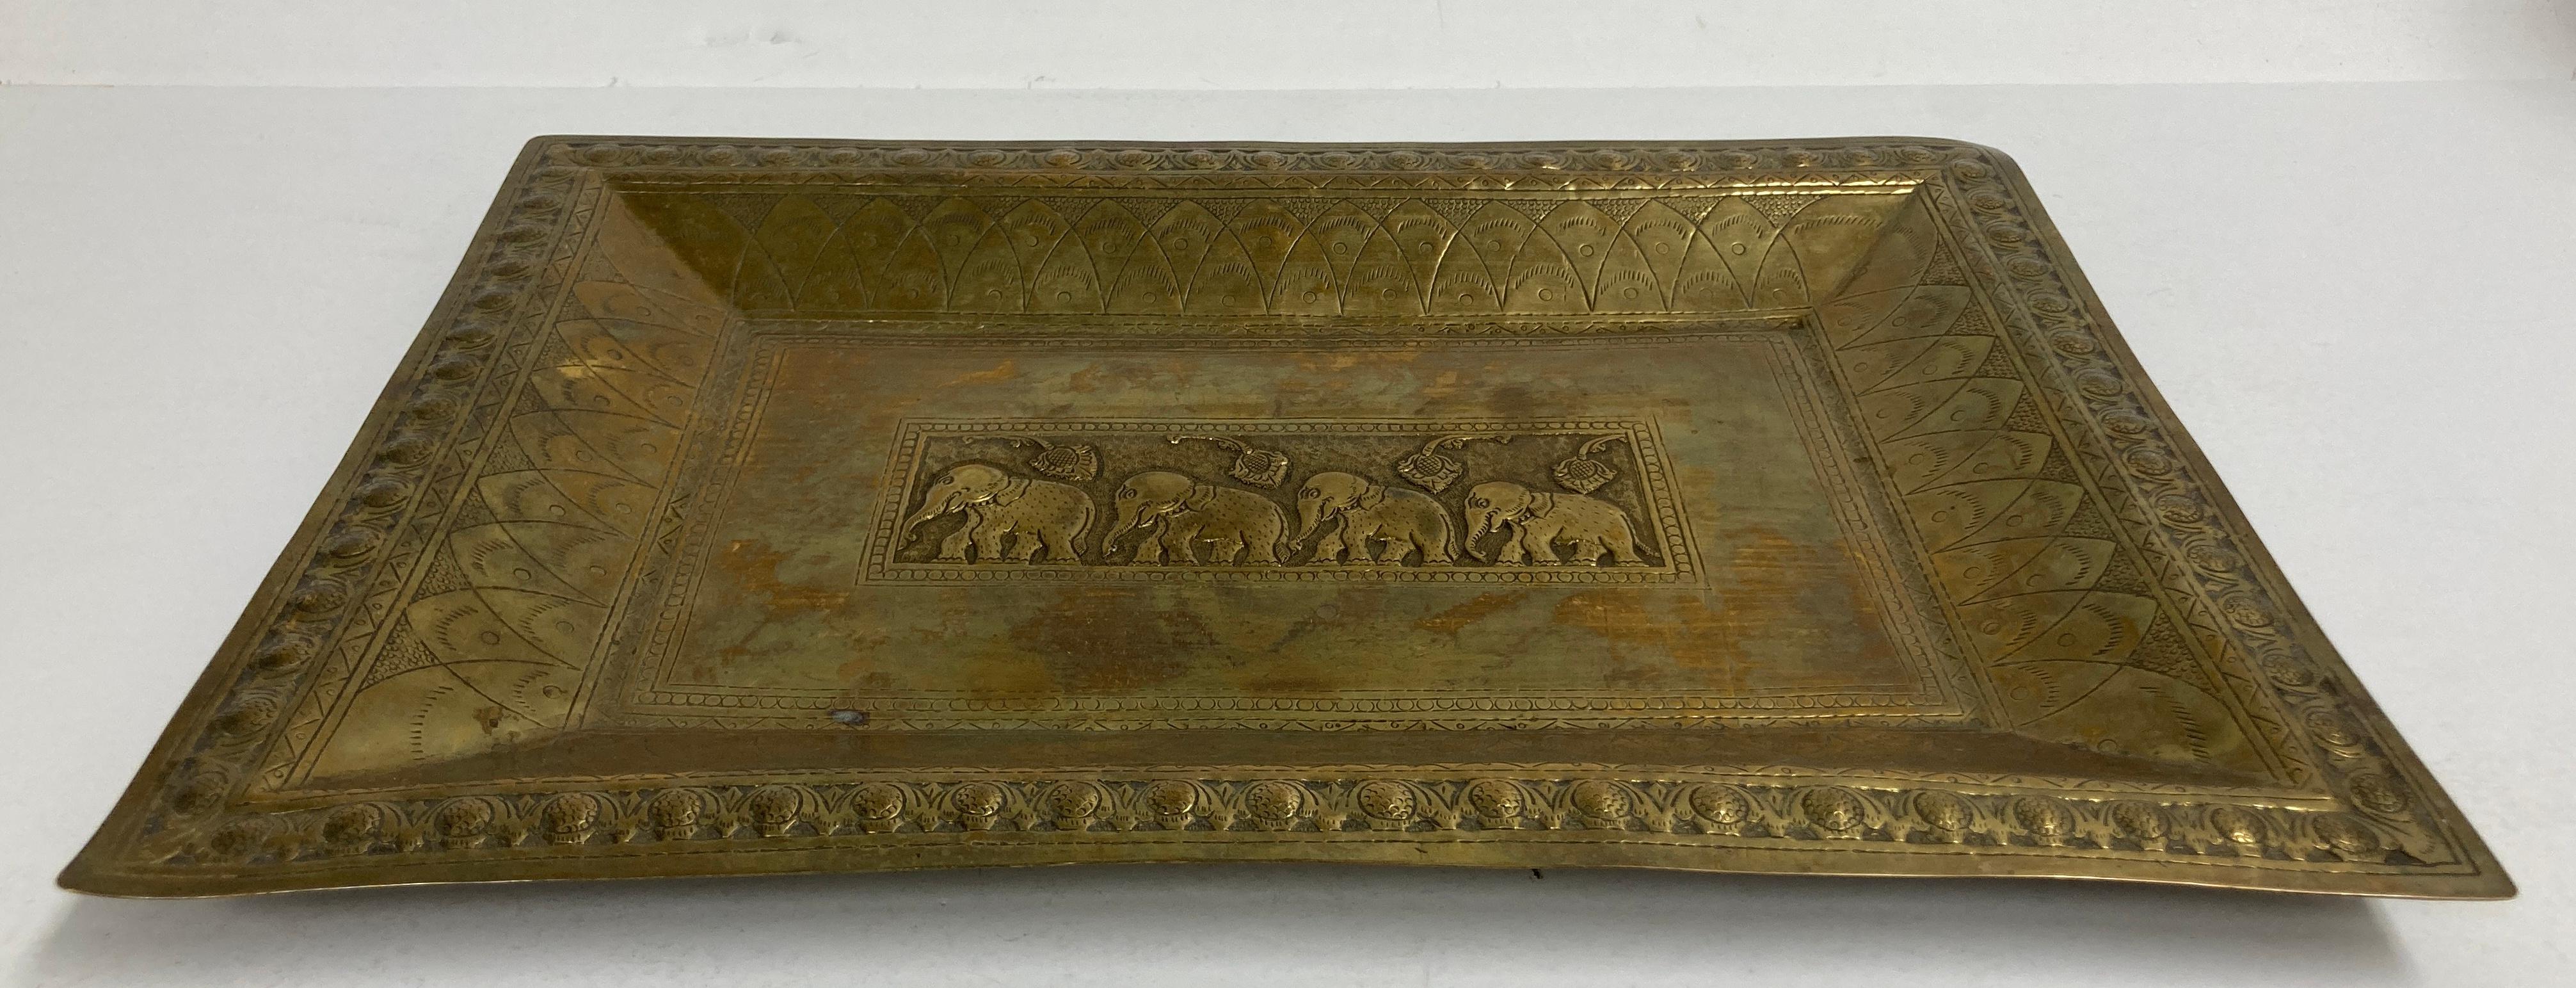 20th Century Vintage Brass Tray Indian Mughal Elephants Motif Engraved Serving Platter For Sale